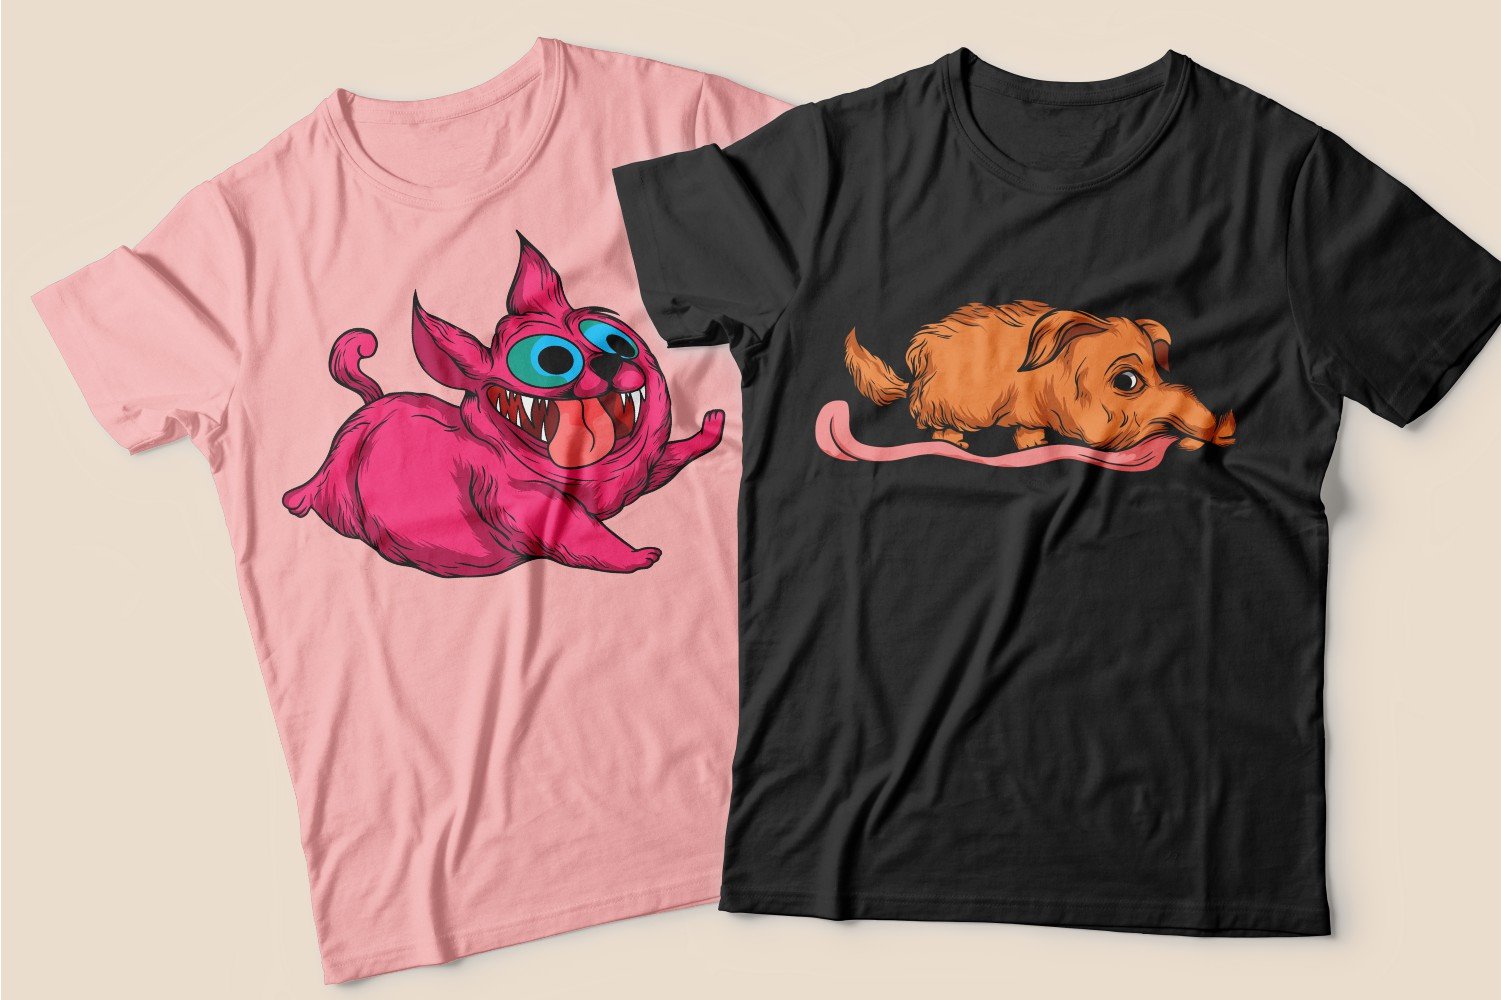 Two T-shirts: one pink raspberry dog ​​and the other black T-shirt with a tired ginger dog.